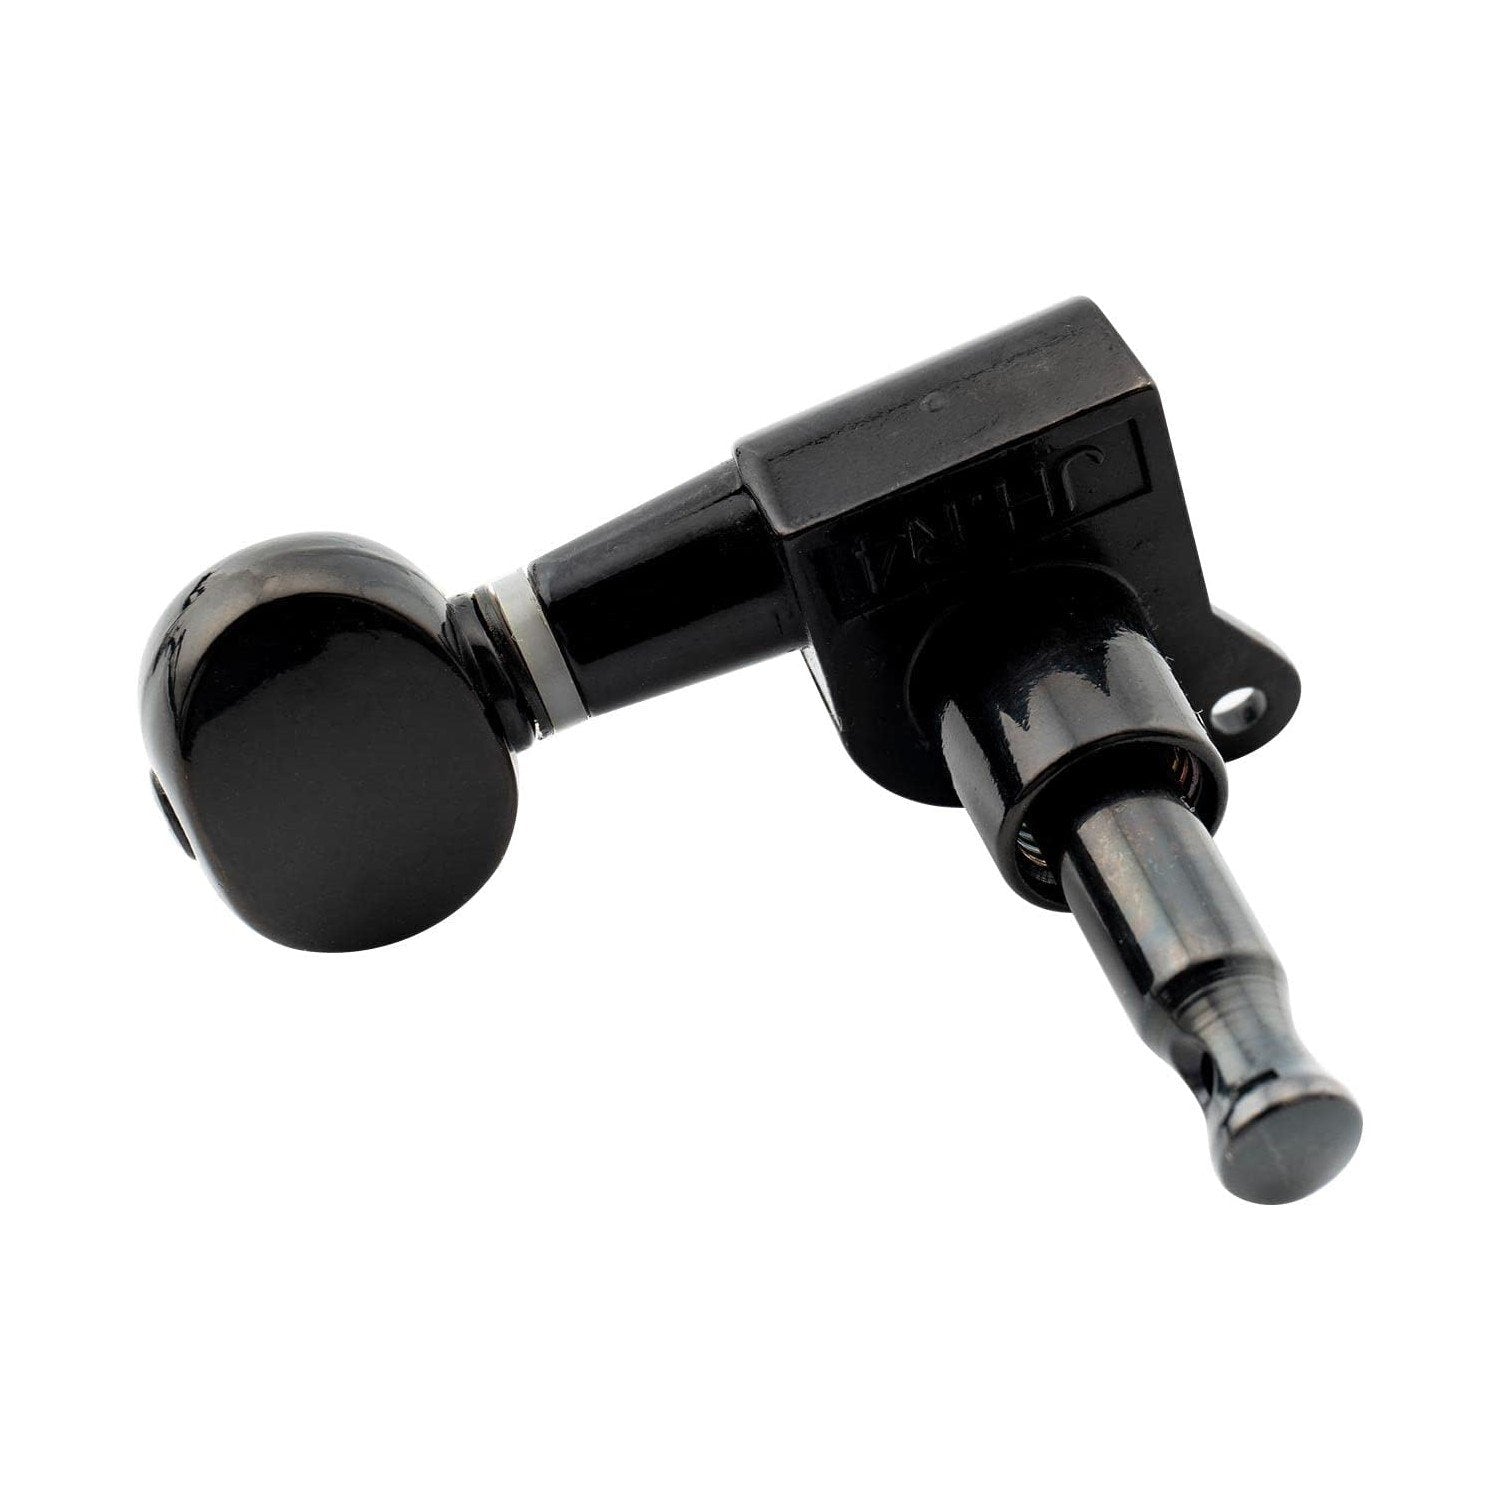 6-In-Line Right Hand Guitar Tuning Pegs, Black